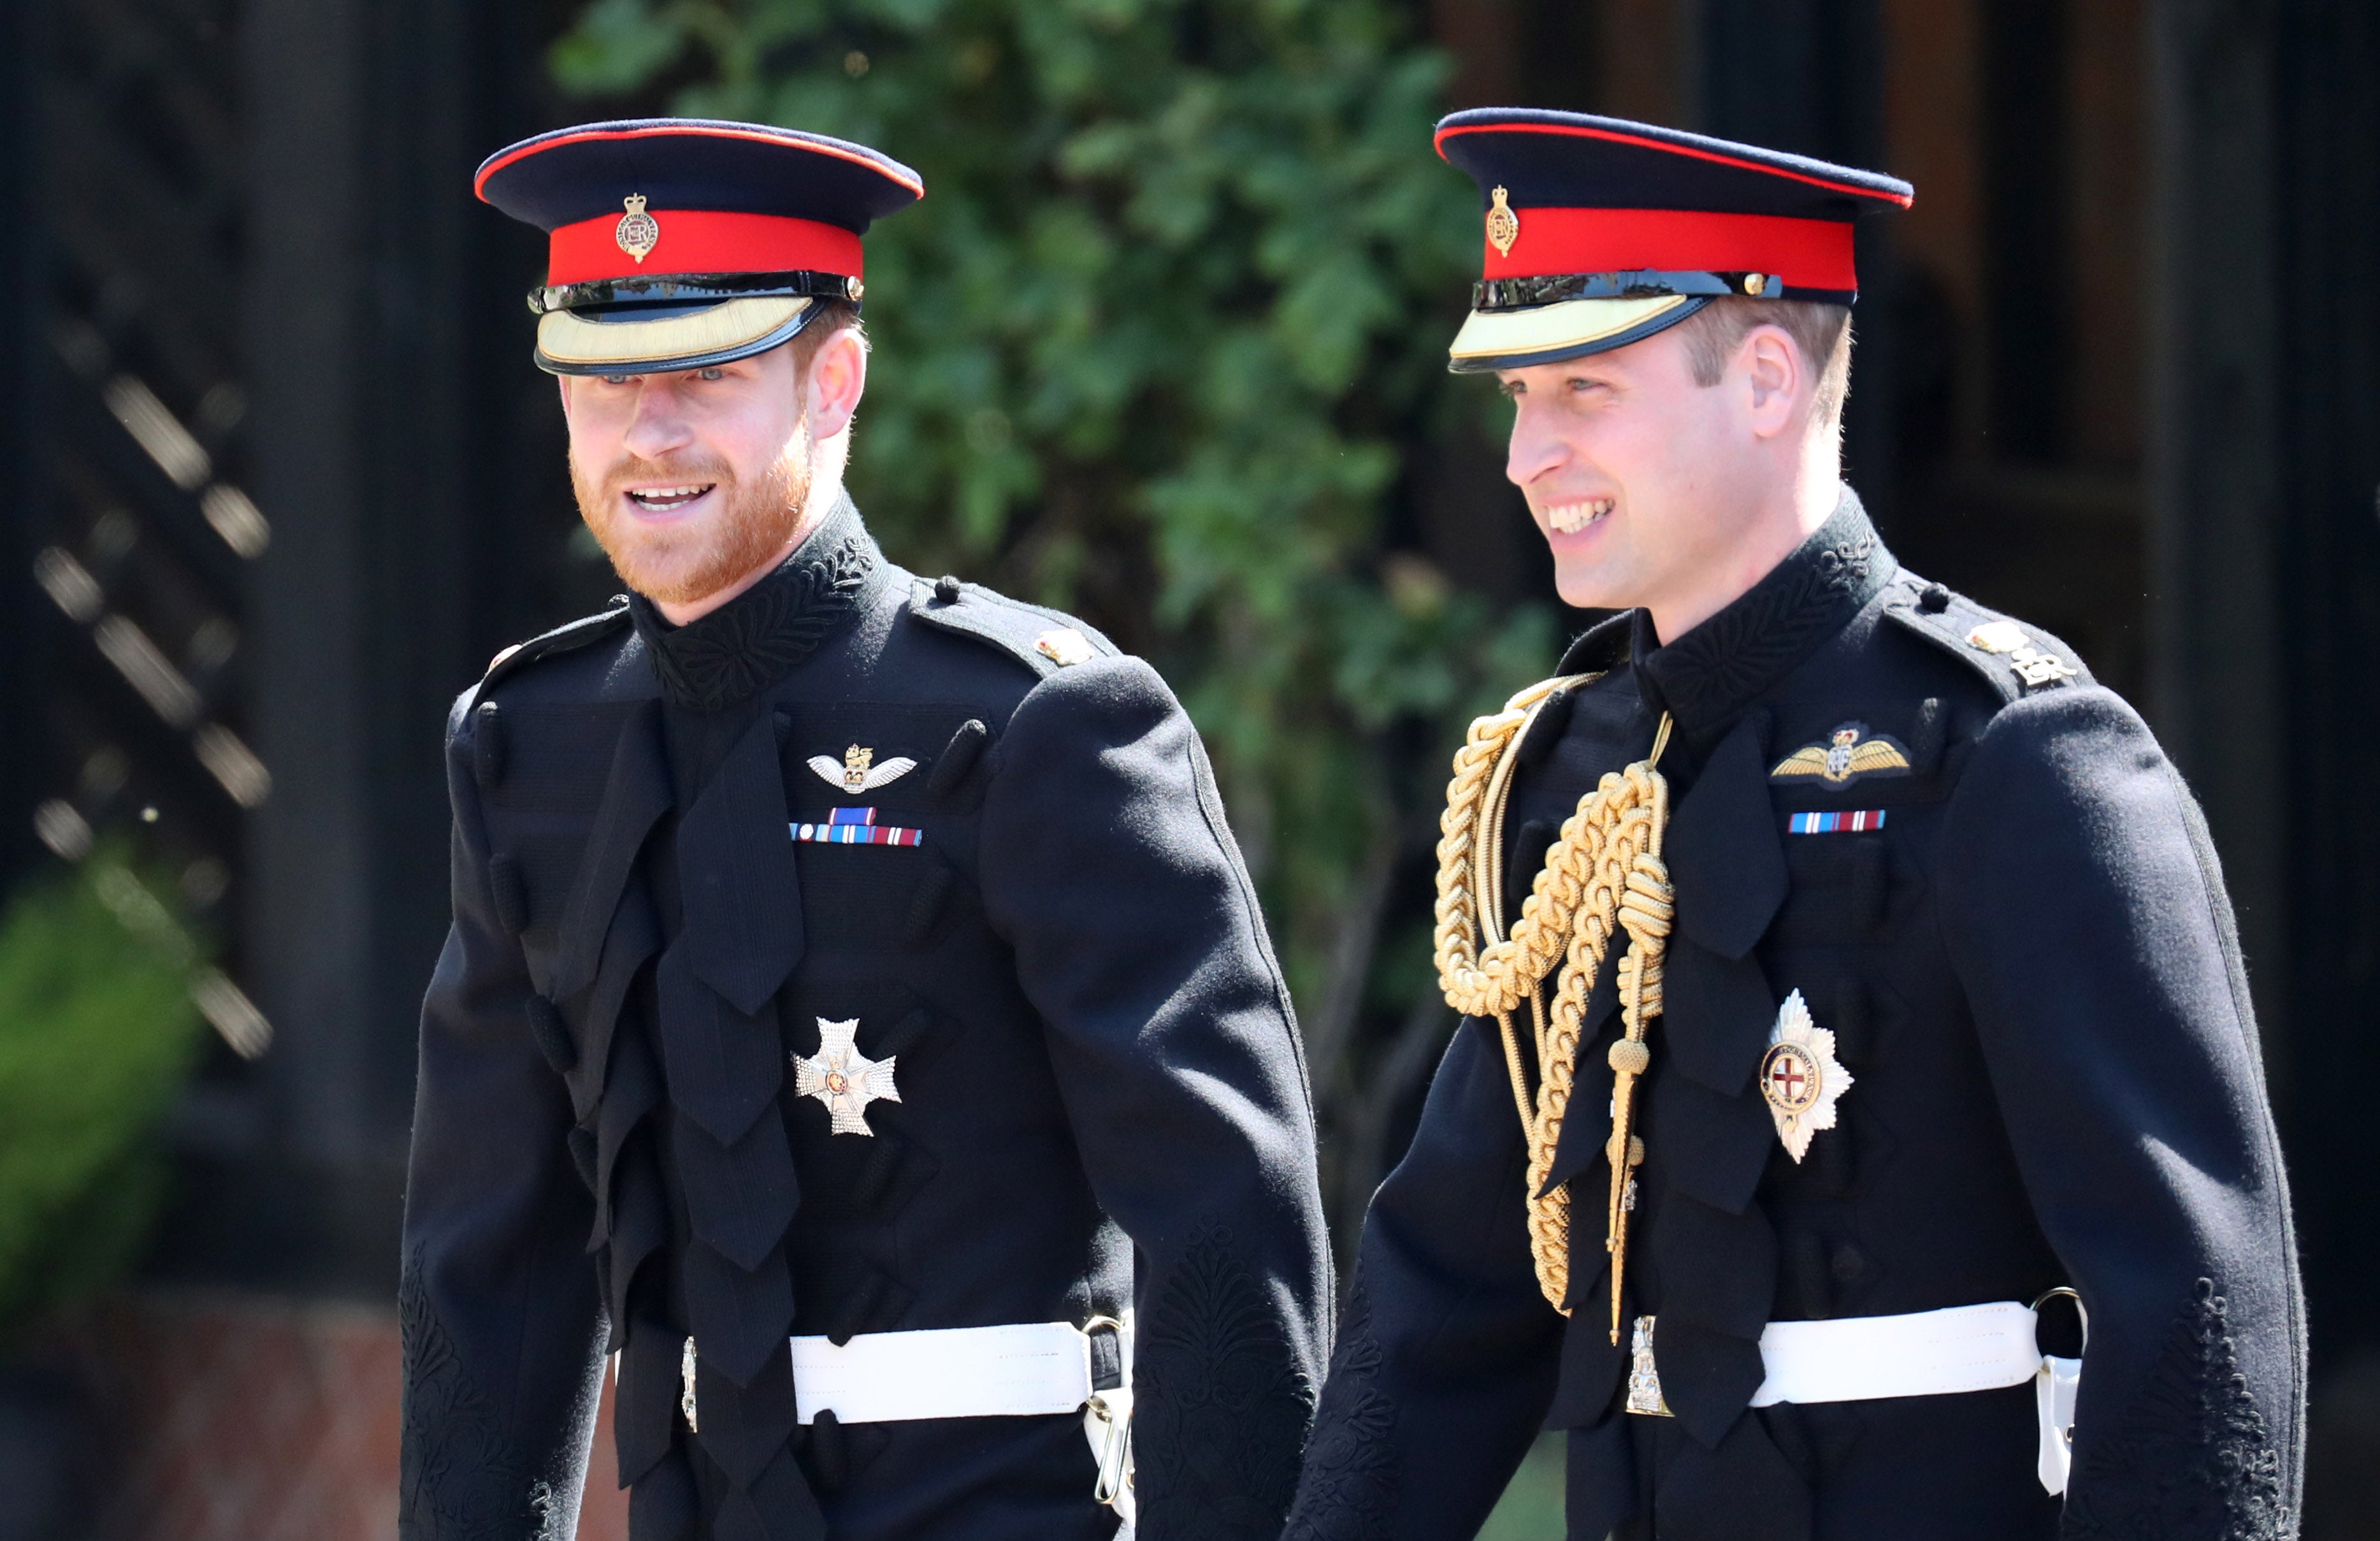 Prince Harry and the Prince of Wales at the former’s wedding in May 2018